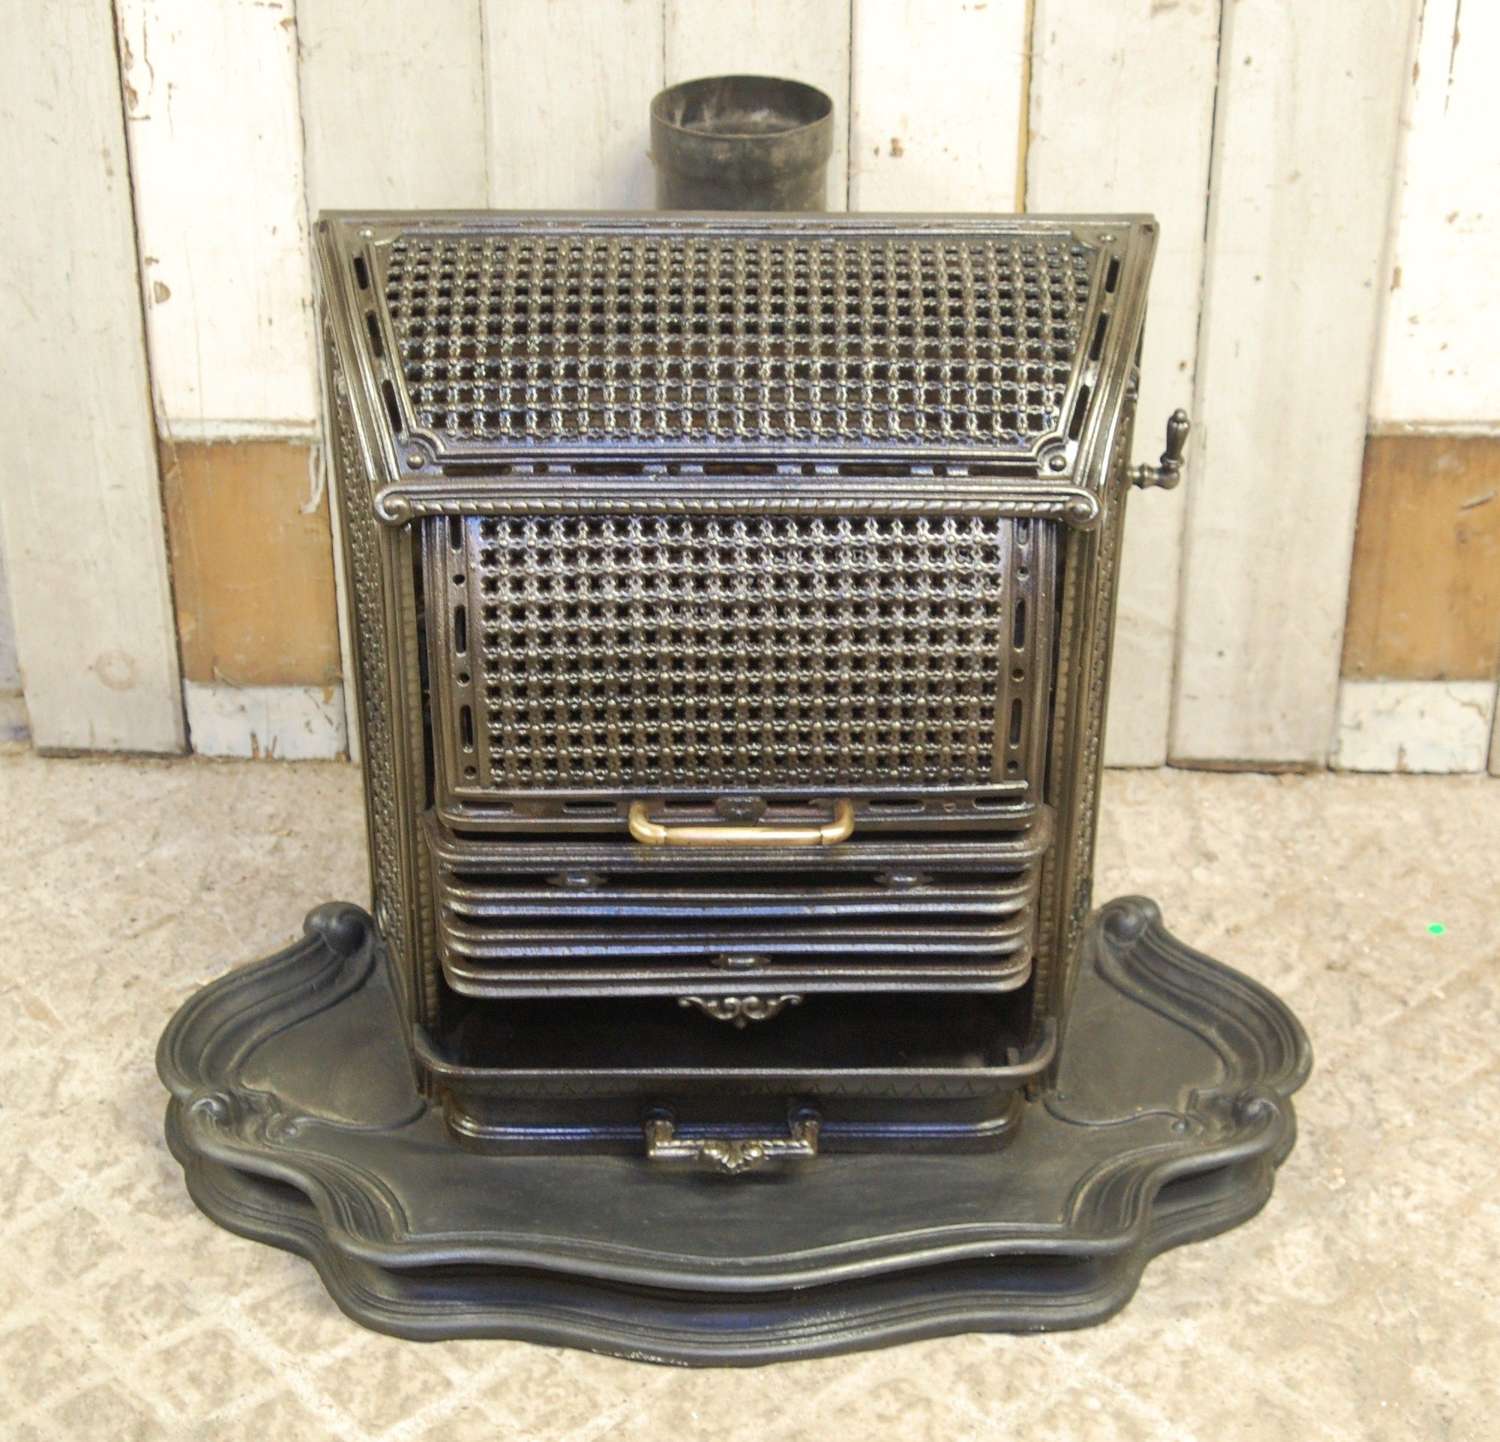 M1337 DECORATIVE FRENCH WOOD BURNING STOVE GARDEN USE OR INTERIOR?